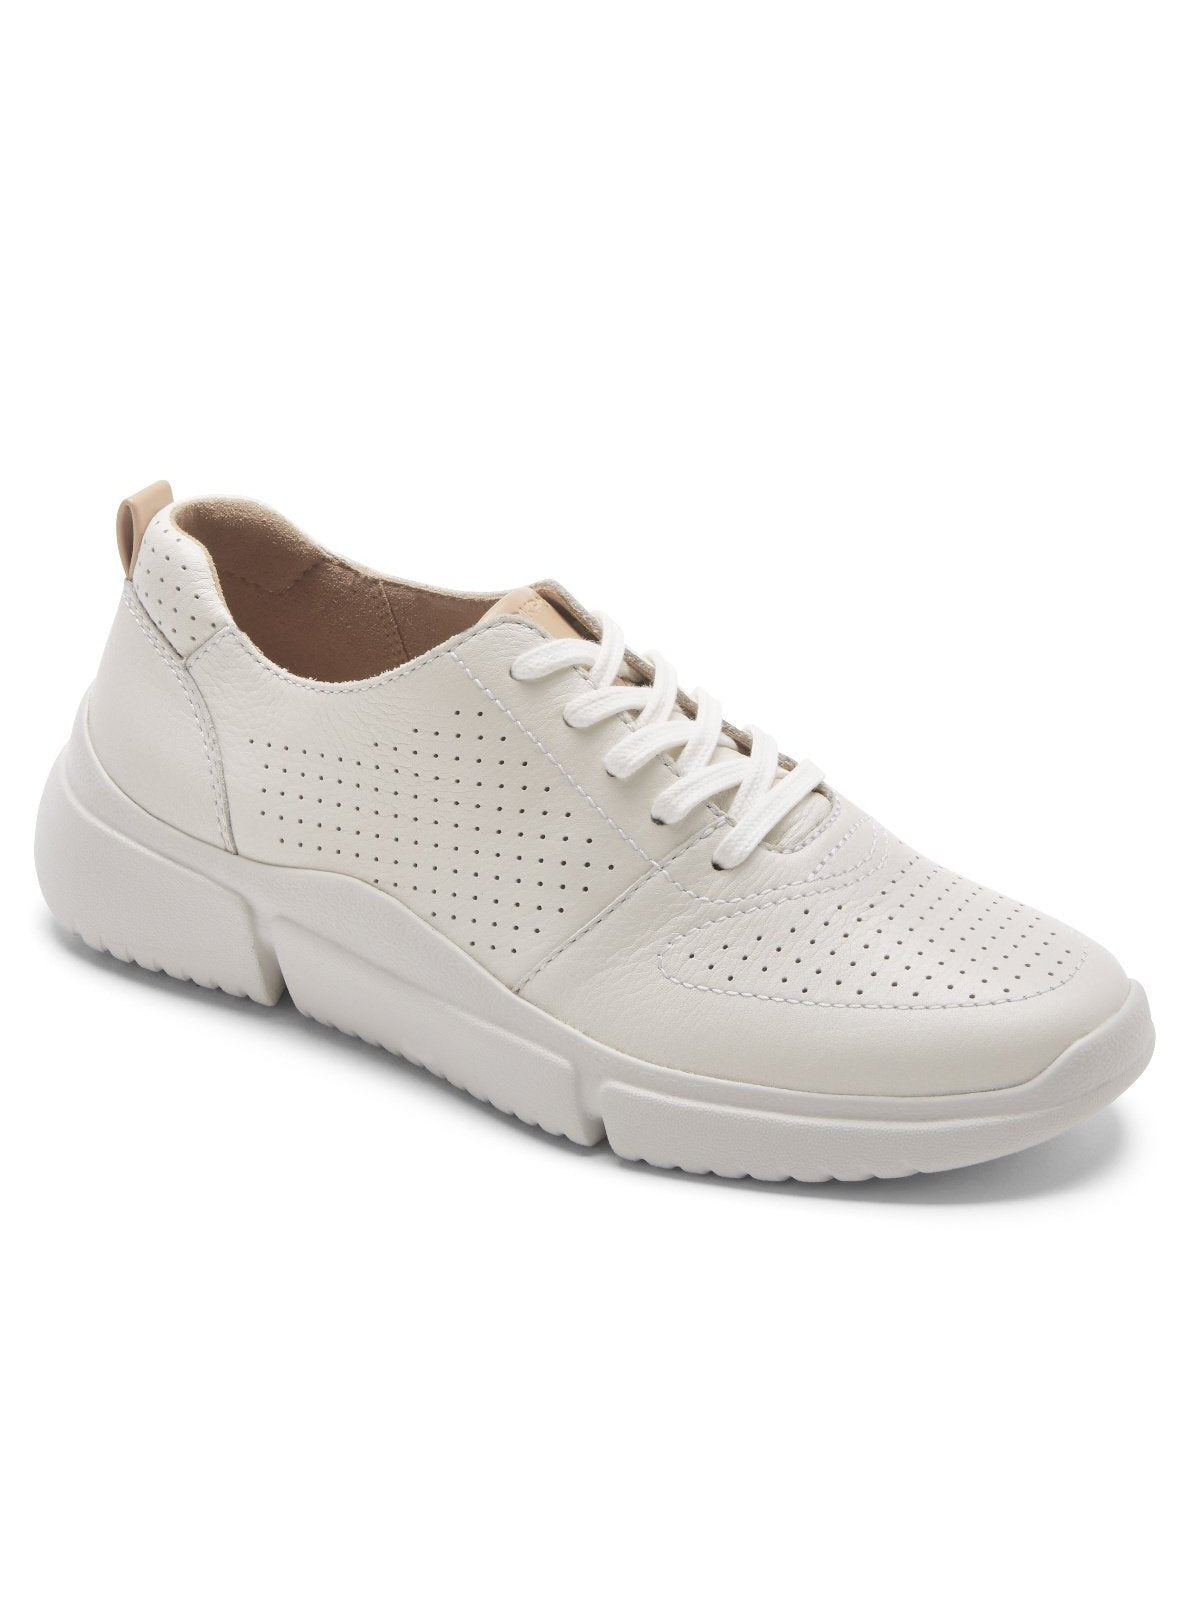 Rockport Women's R-Evolution Washable Lace-Up Sneakers White Washable CI5132.